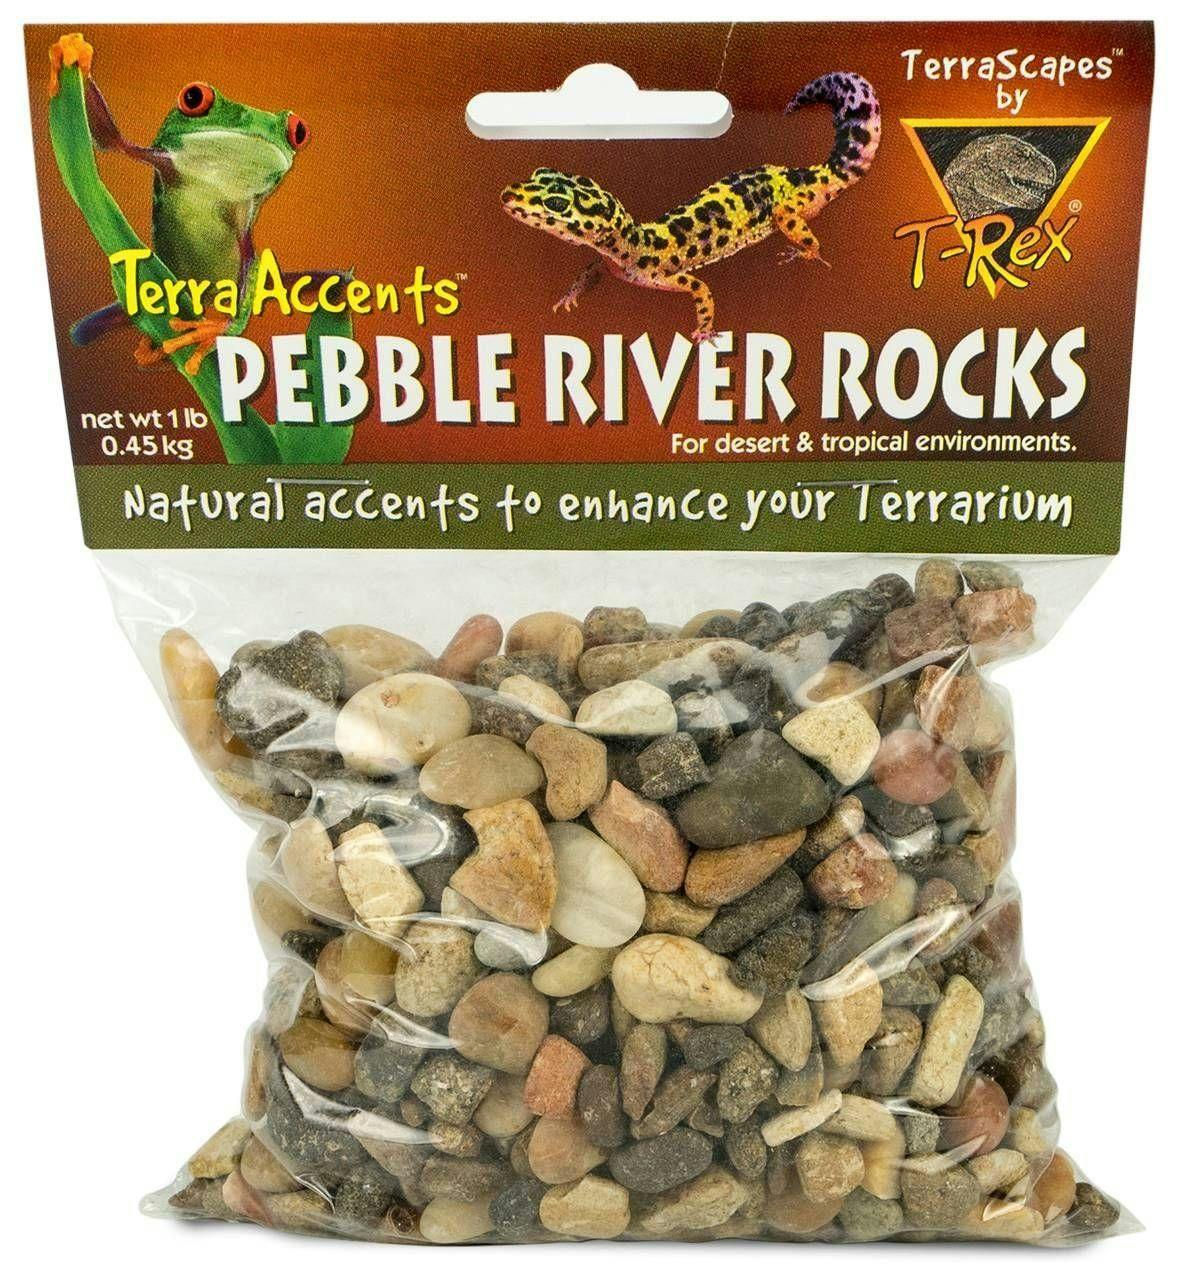 Image for T-Rex Terra Accents Pebble River Rocks by Josh's Frogs